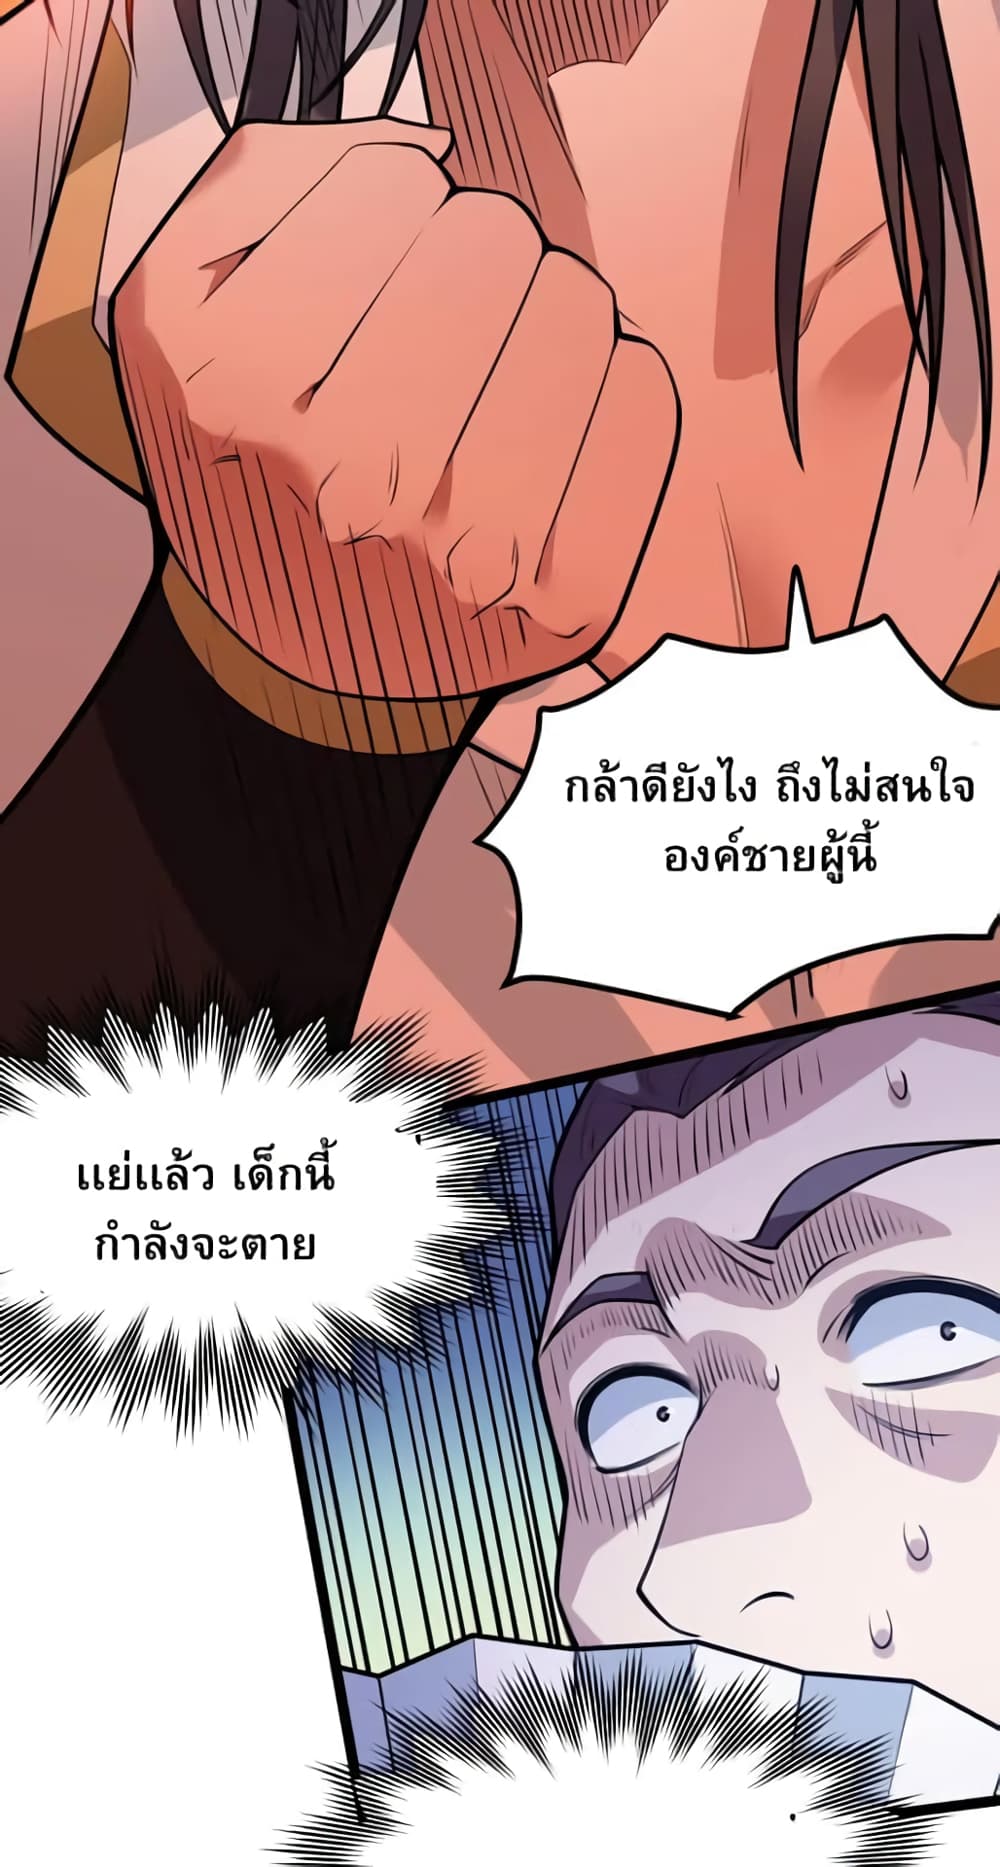 Godsian Masian from Another World ตอนที่ 104 (33)